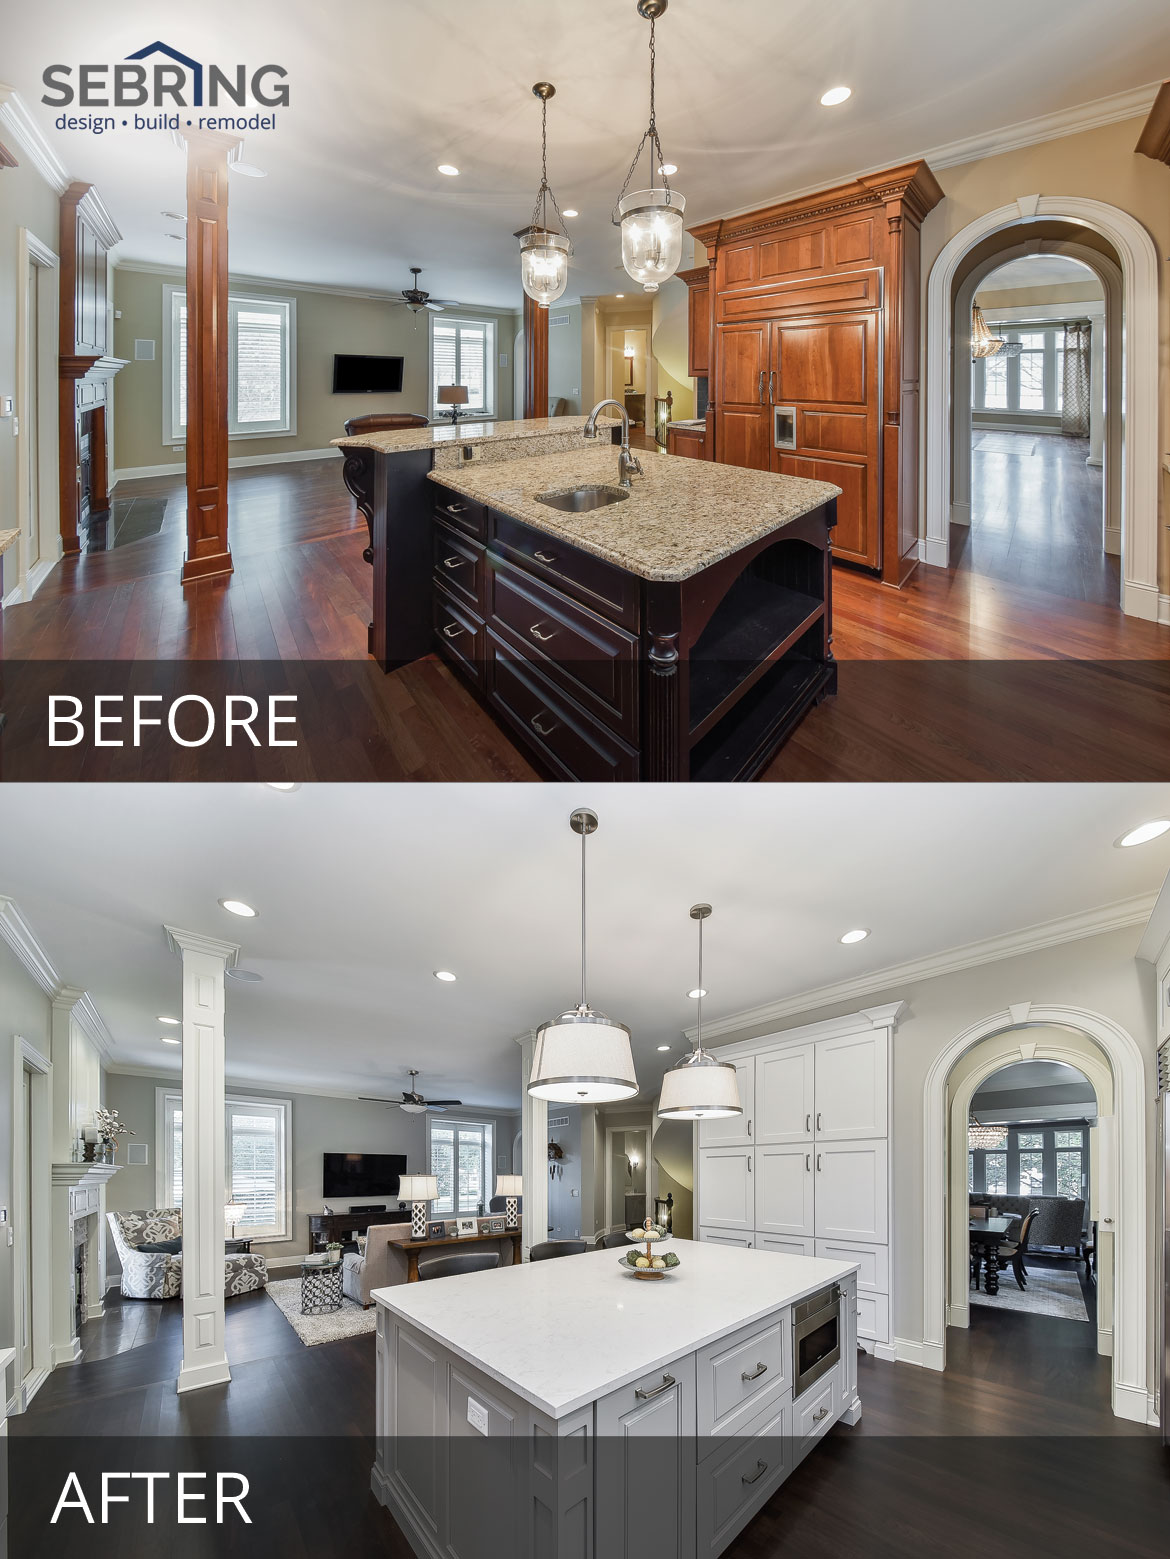 Rob & Michelle's Whole House Before & After Pictures | Home Remodeling